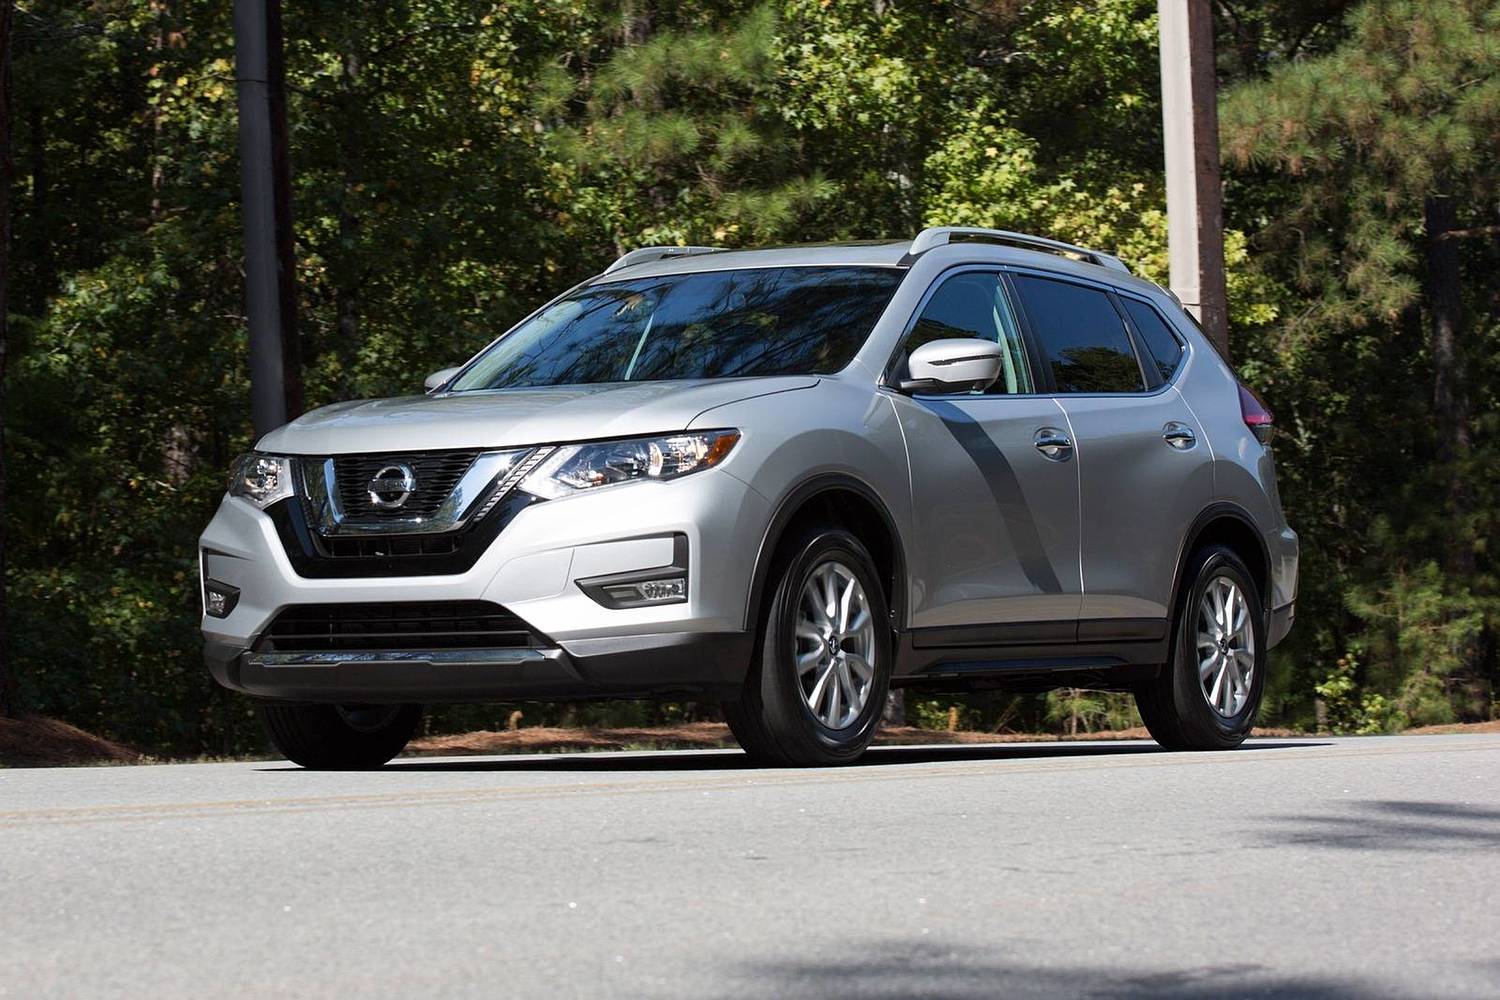 Nissan Rogue SV 4dr SUV Exterior. Premium Package Shown. (2017 model year shown)